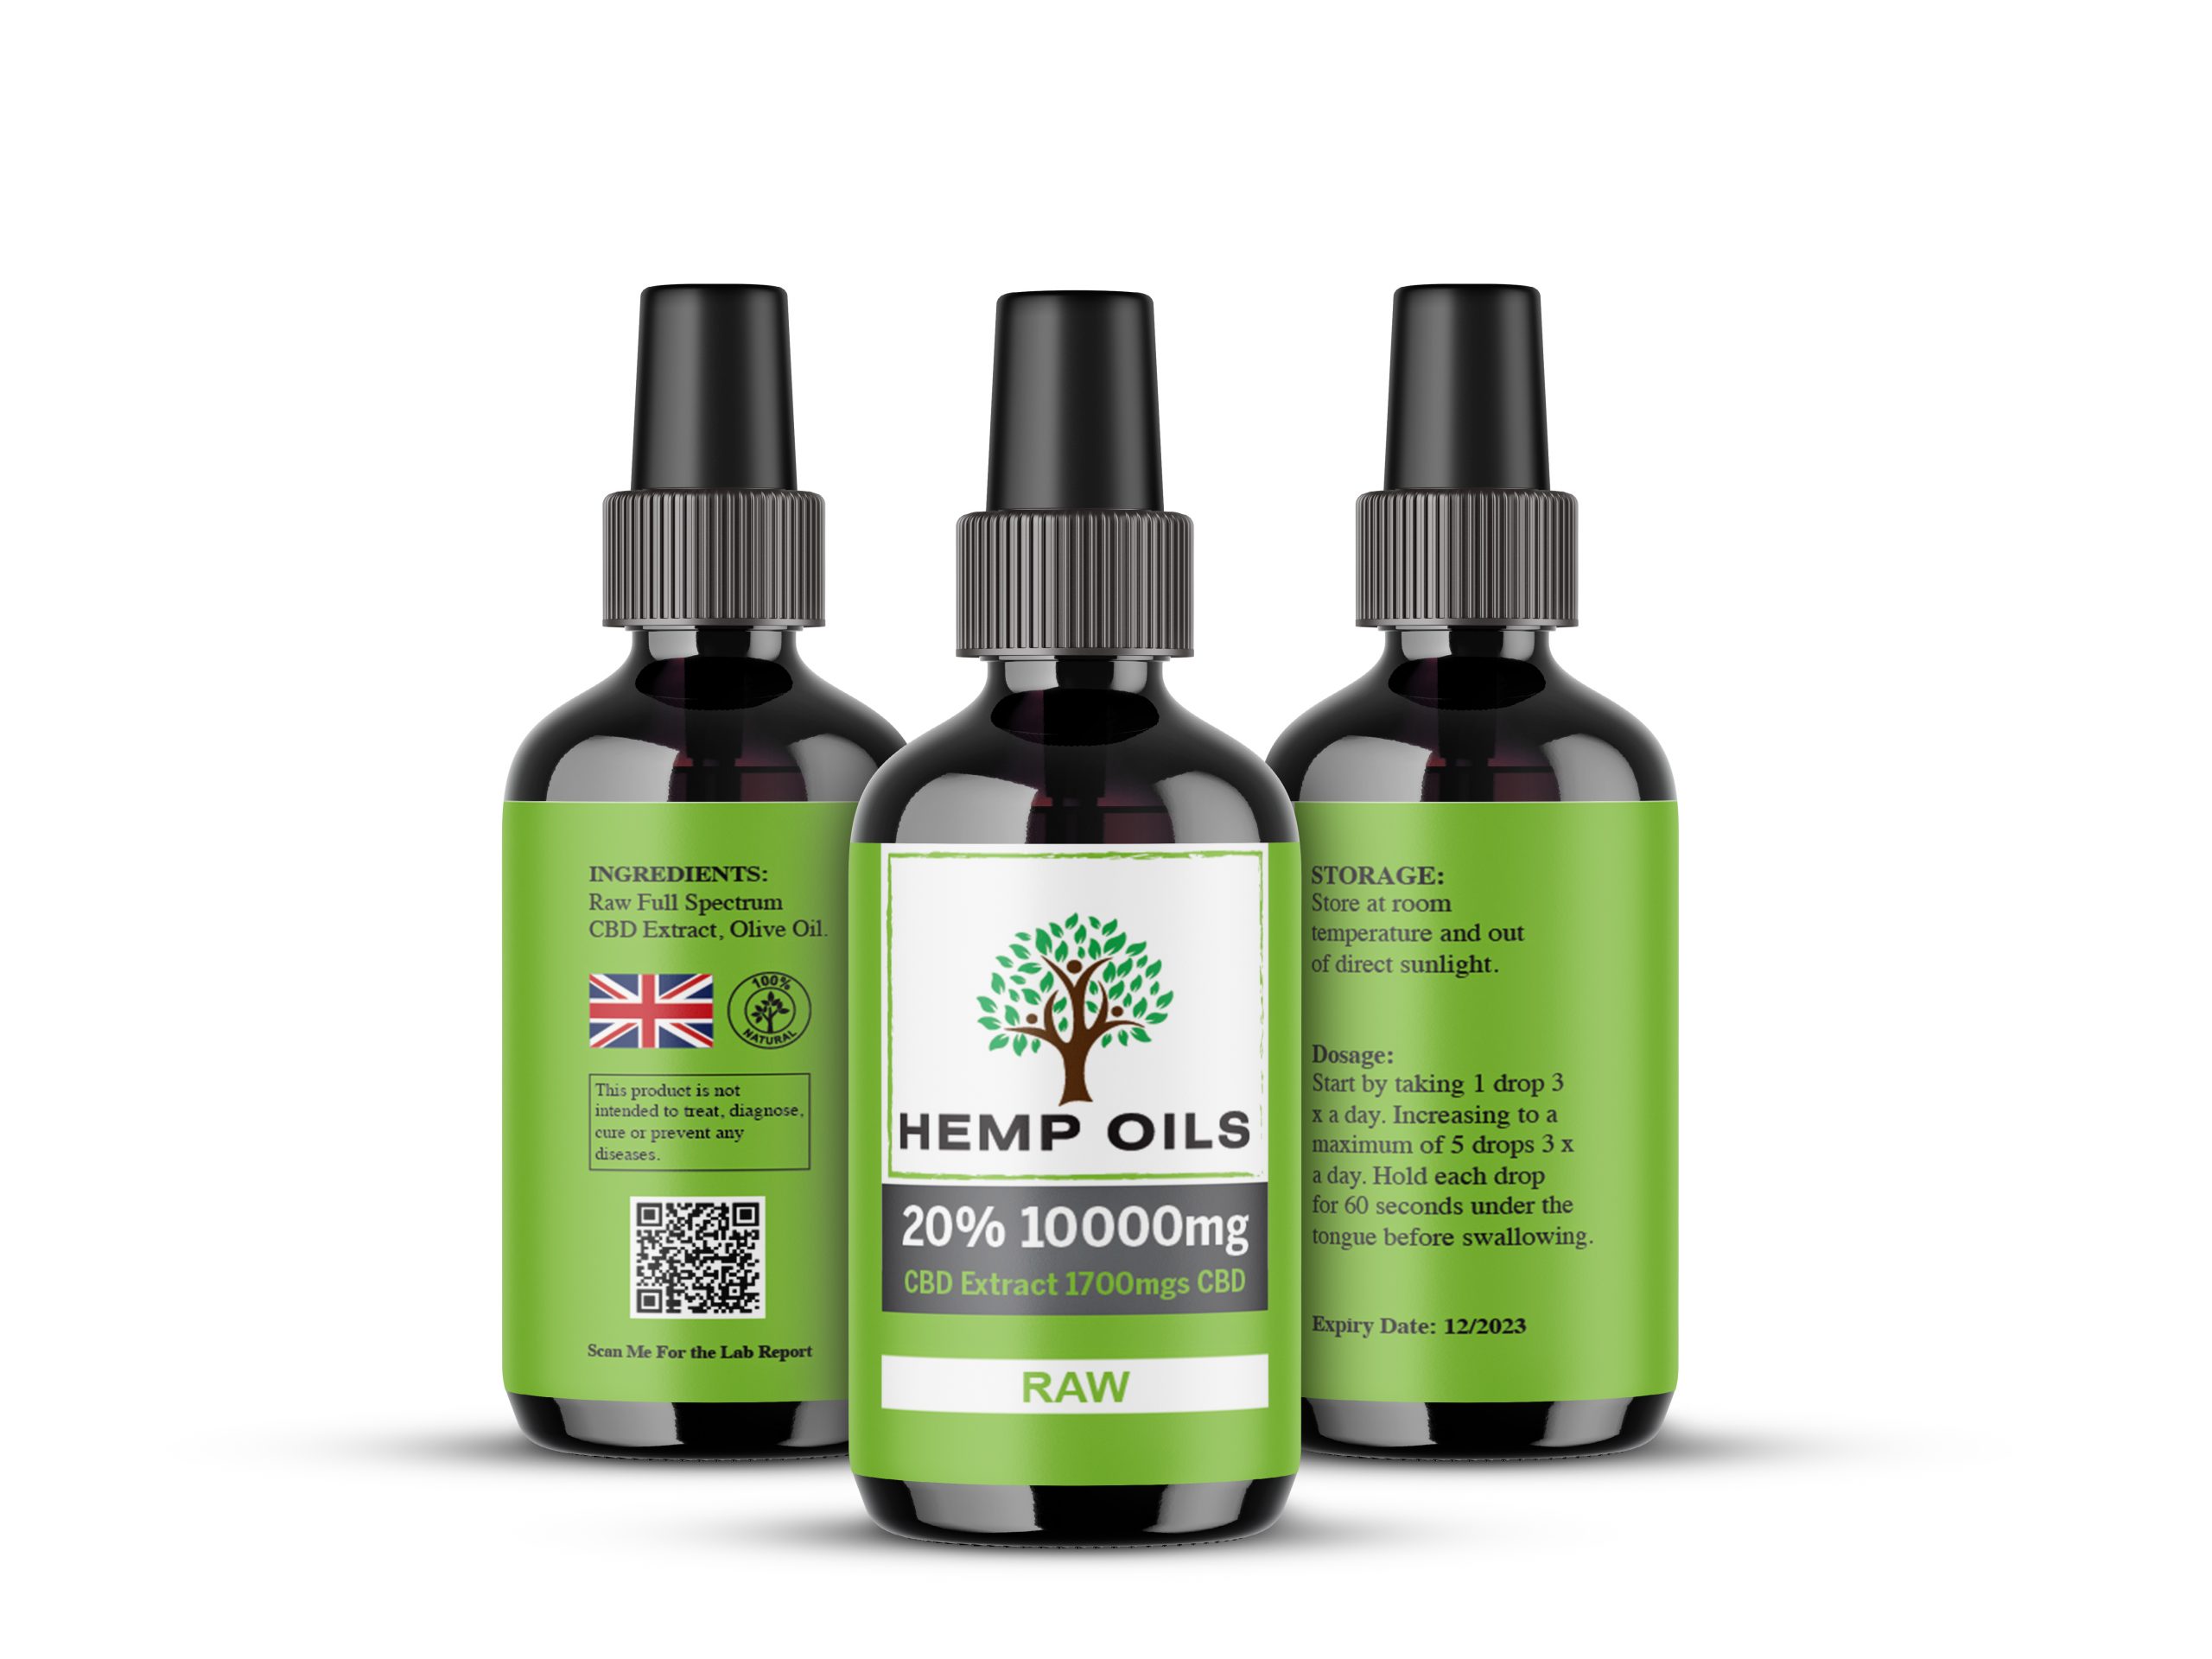 Amazon.com: (2 Pack) Raw Hemp Oil - 5000MG - Cinnamint Flavor, Mushroom  Infused for Enhanced Bioavailability - Made in USA - Anti-Inflammatory, Hip  & Joint Support, Rich in Omega 3 Fatty Acid : Health & Household